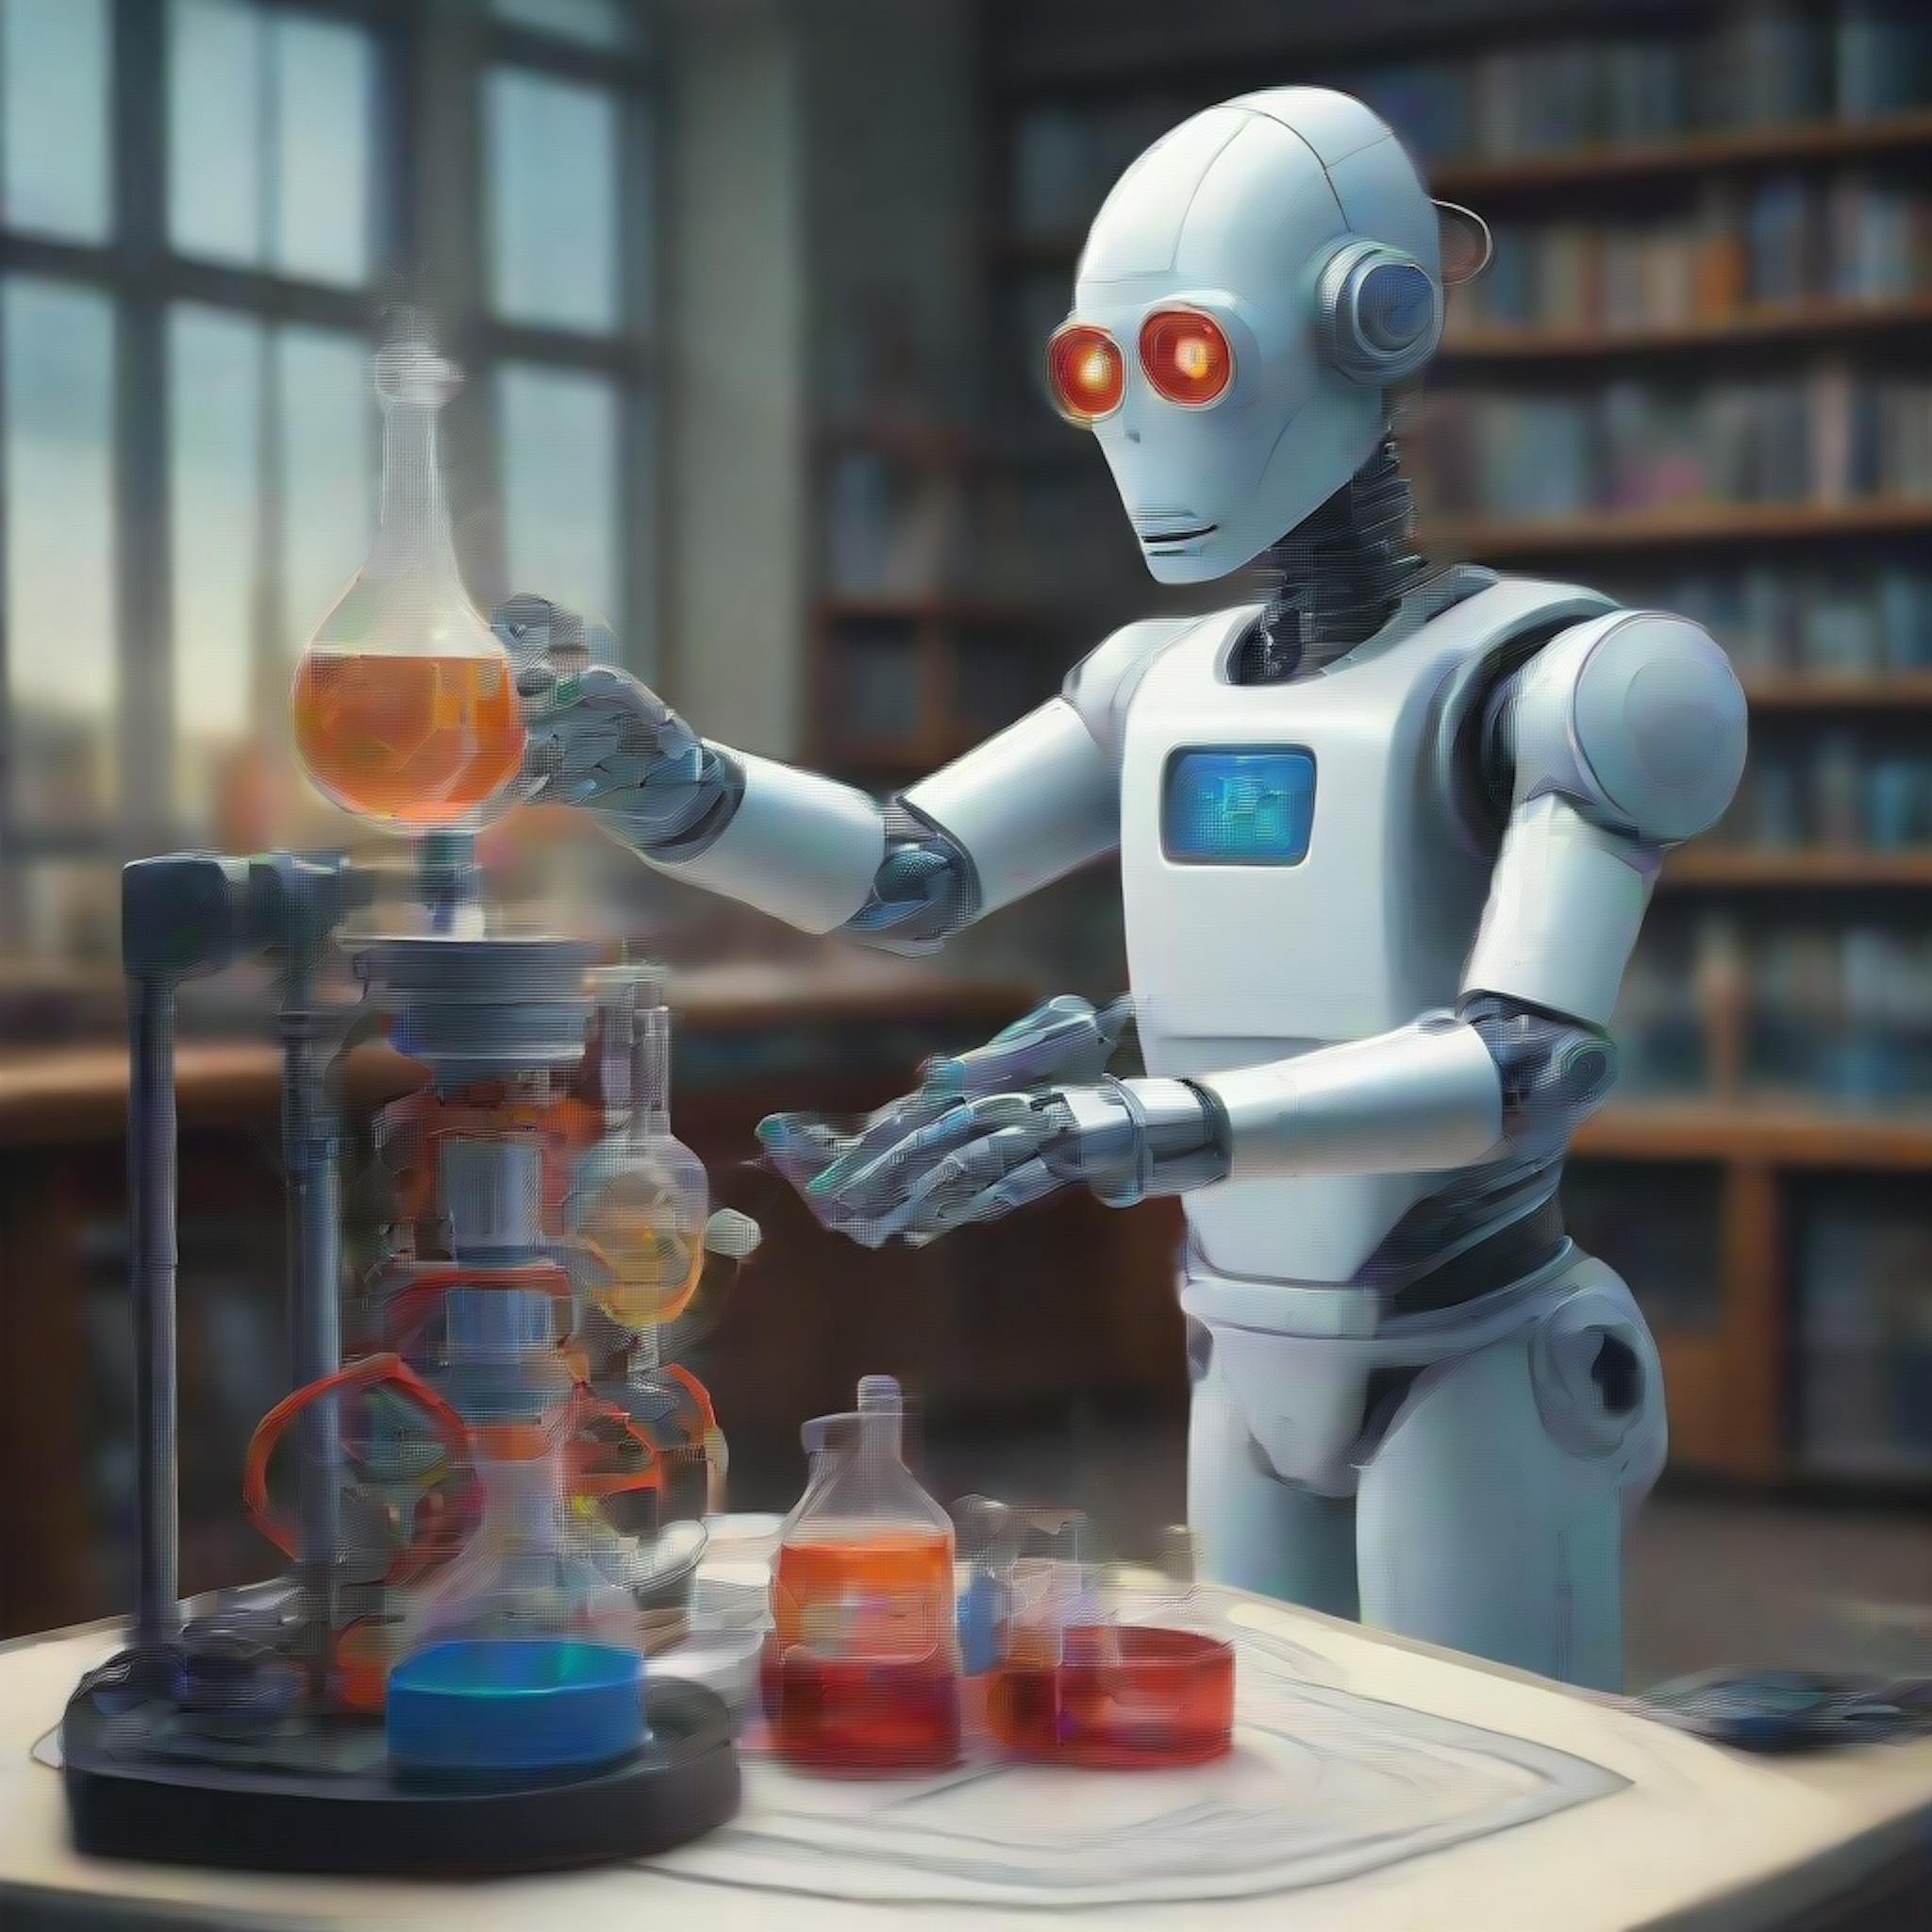 featured image - Initiating Socratic Dialogues with GenAIbots in Chemistry Education